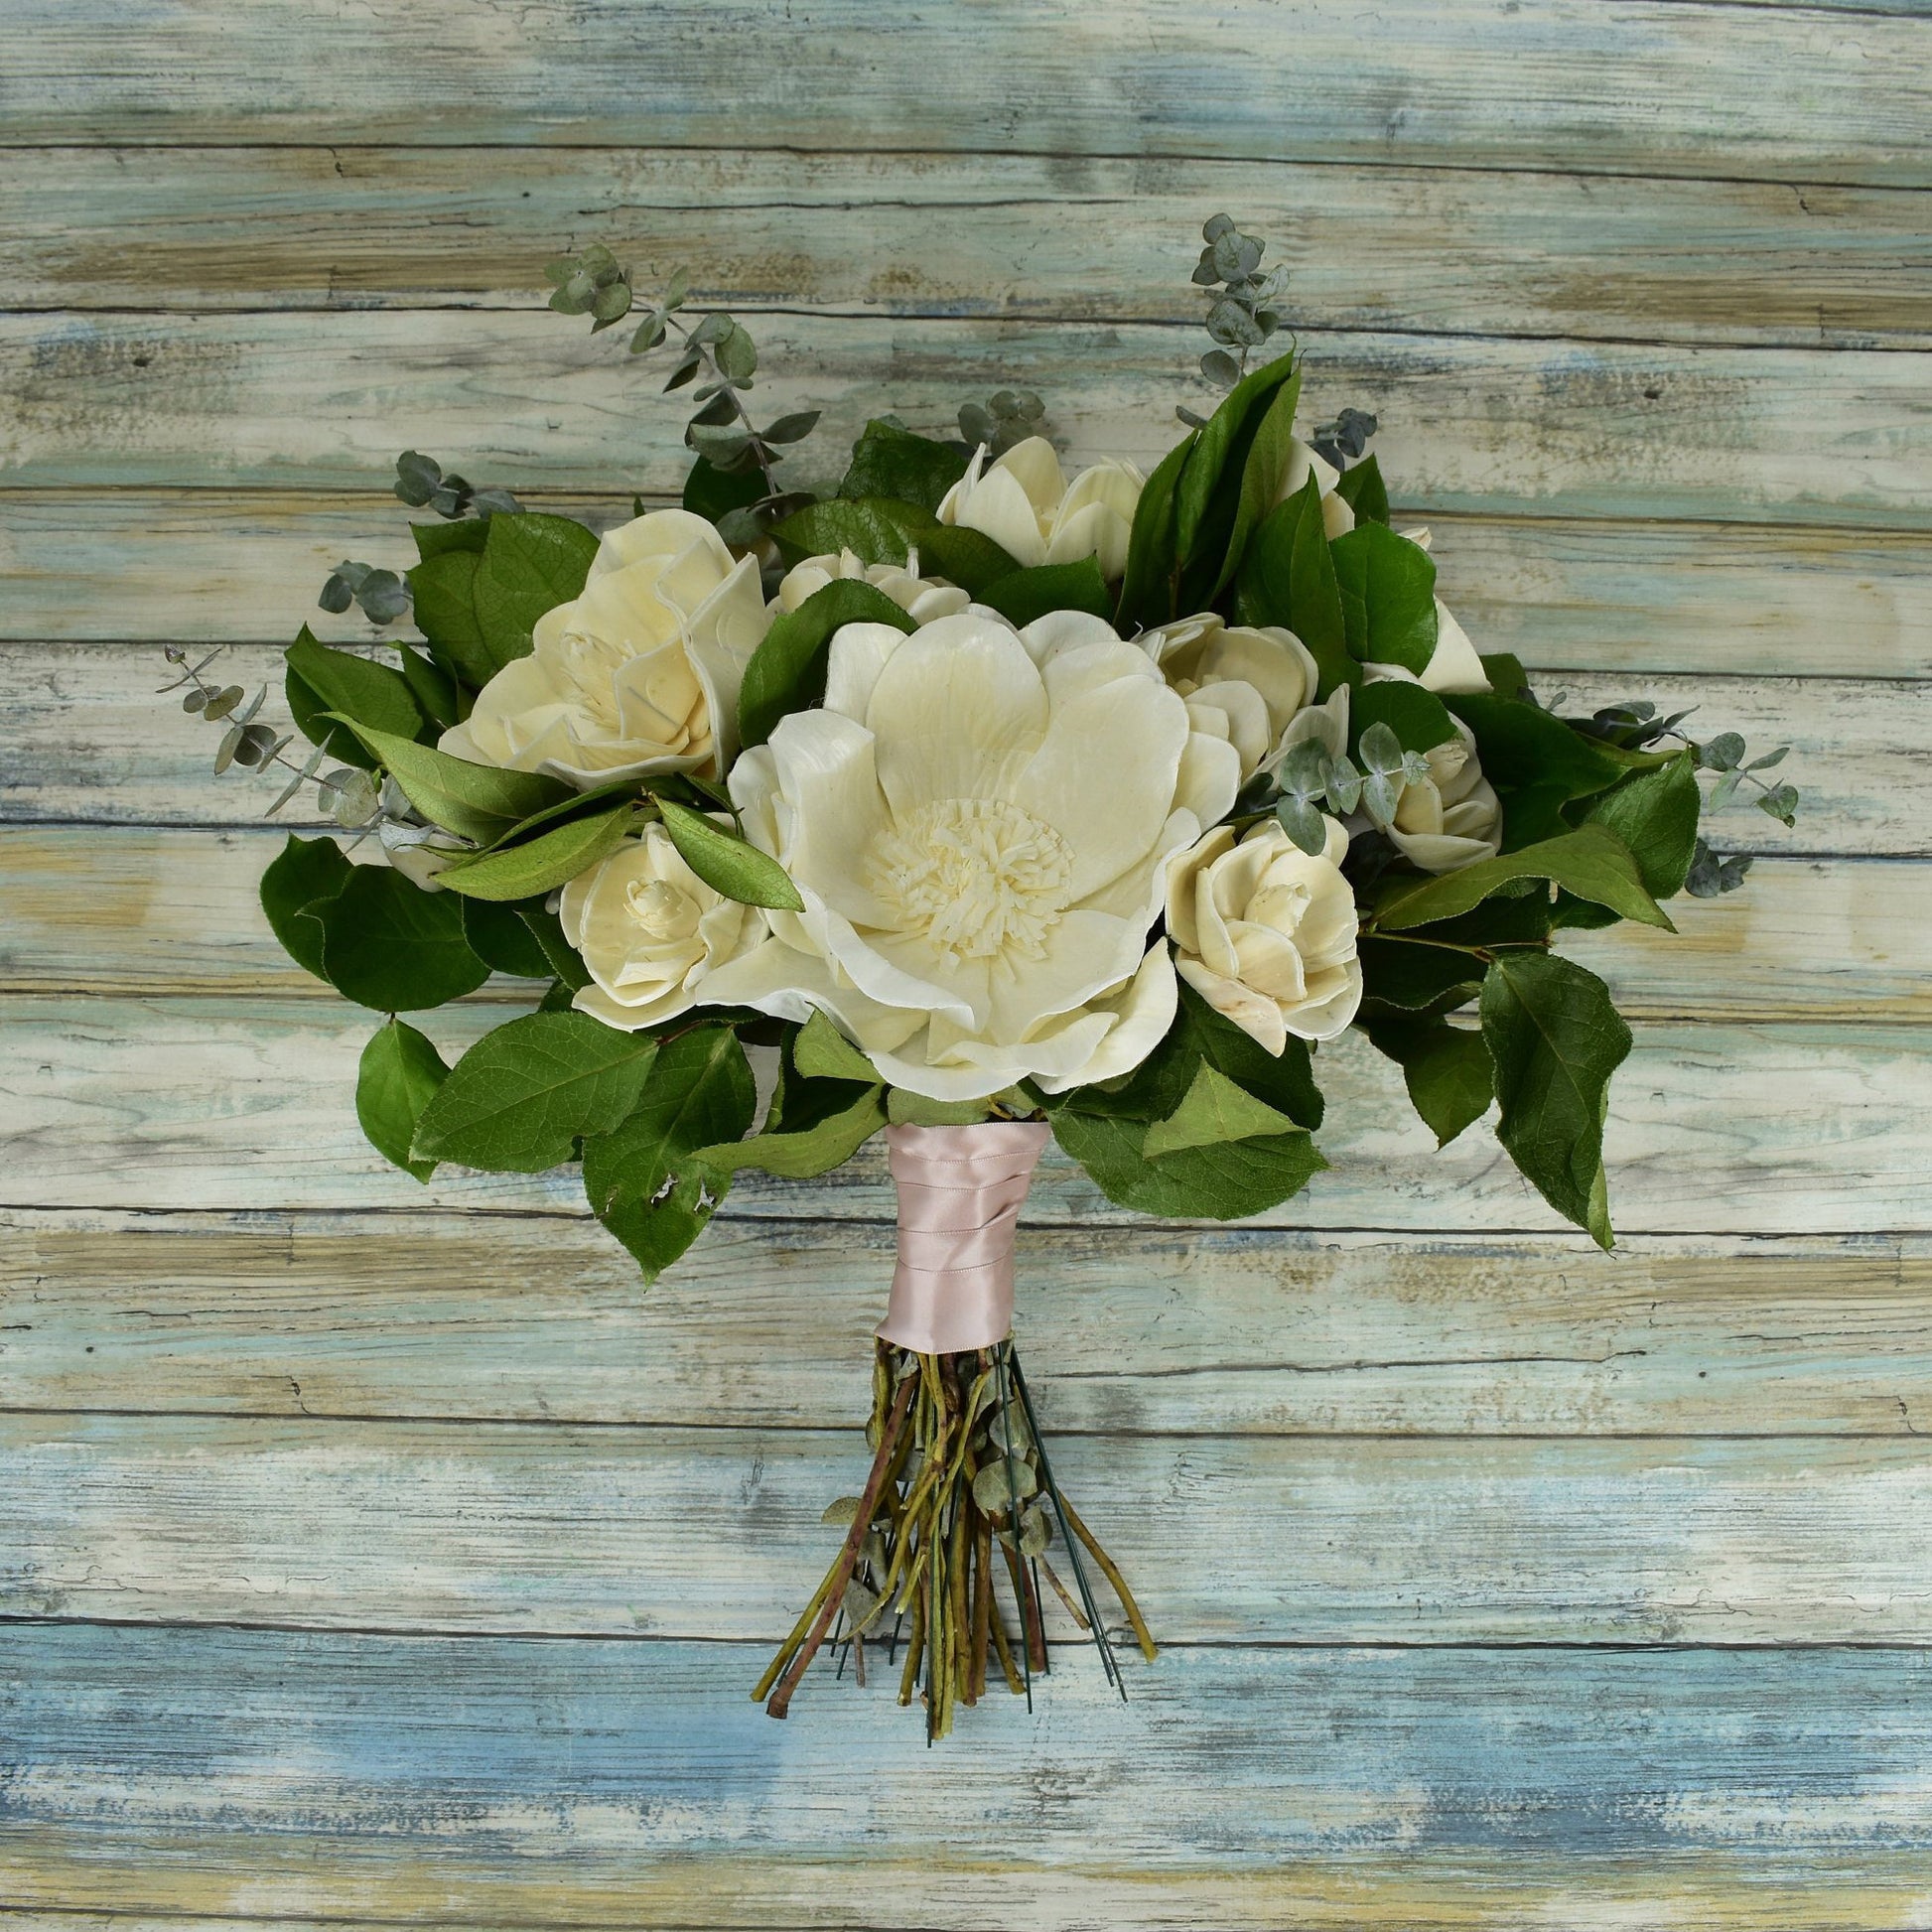 Simply Stunning Bouquet - Sola Wood Flowers